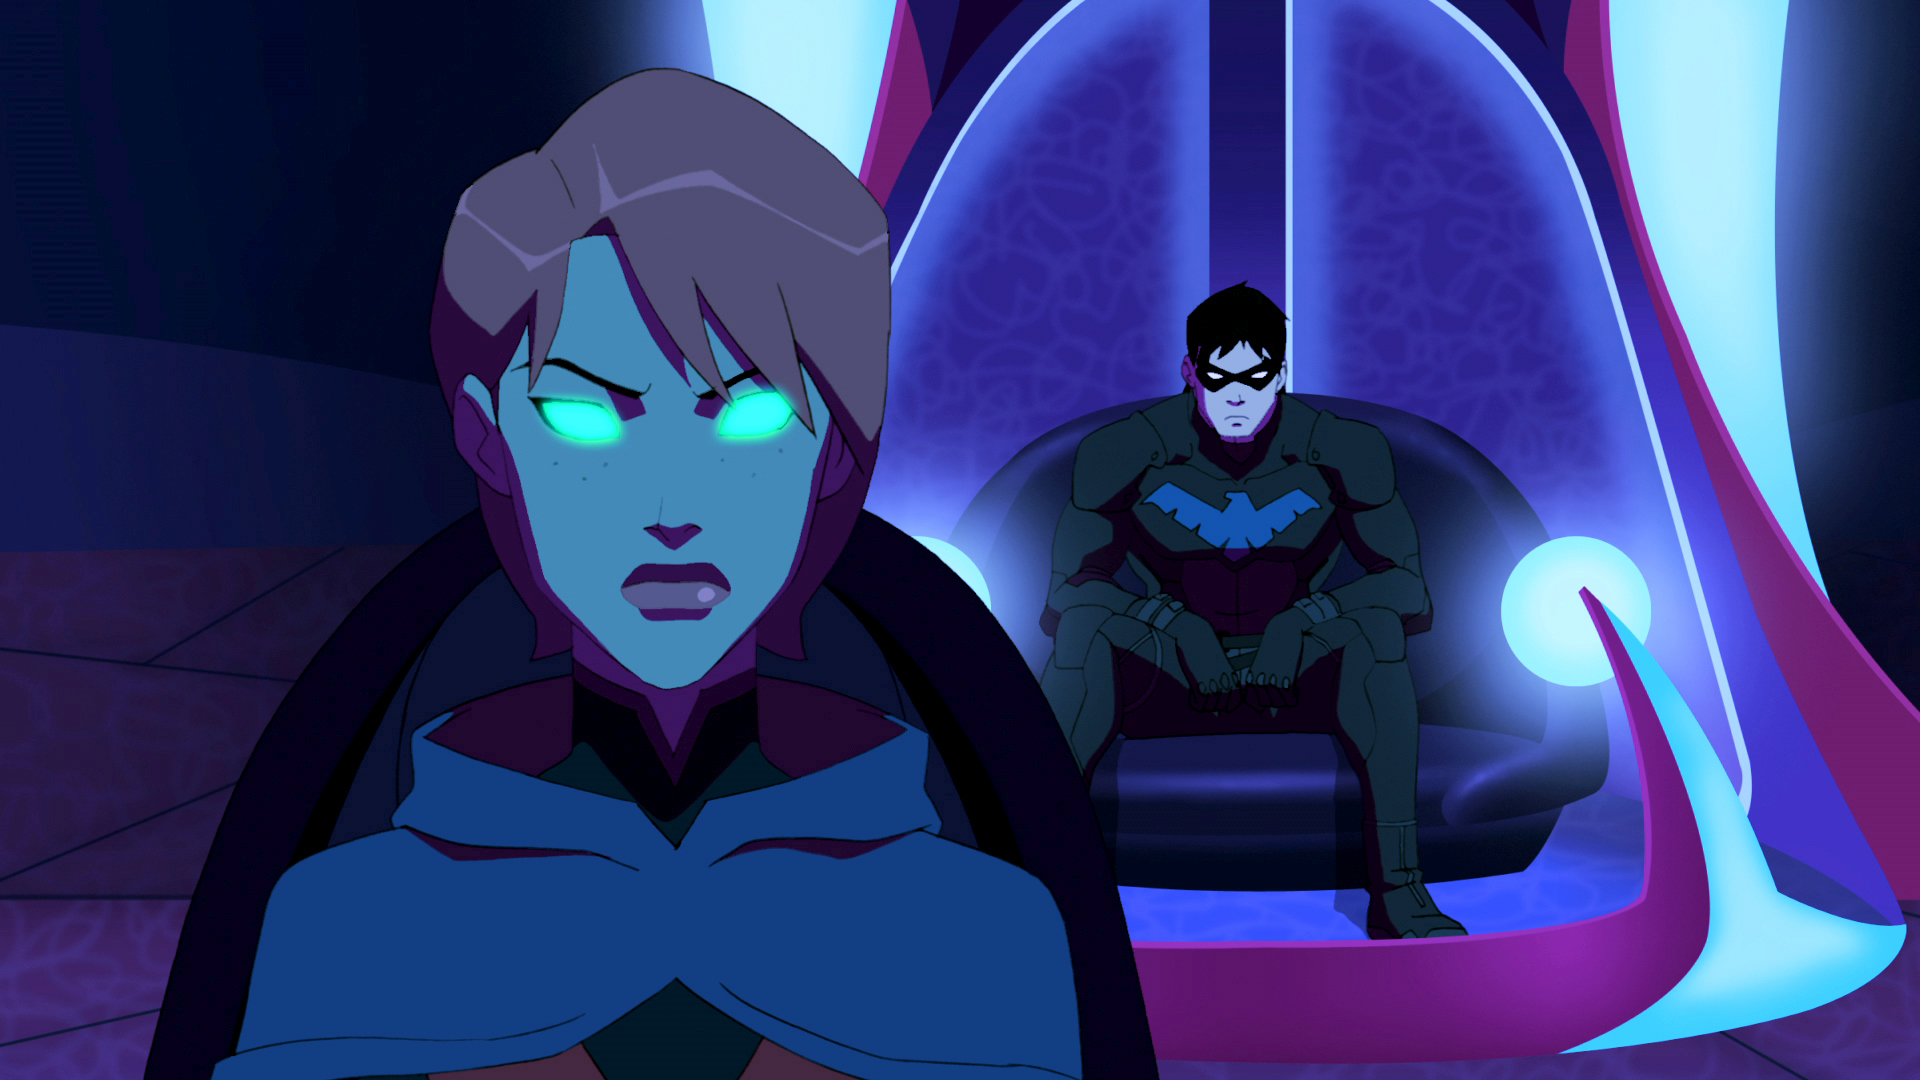 Starfire And Nightwing In Young Justice - HD Wallpaper 